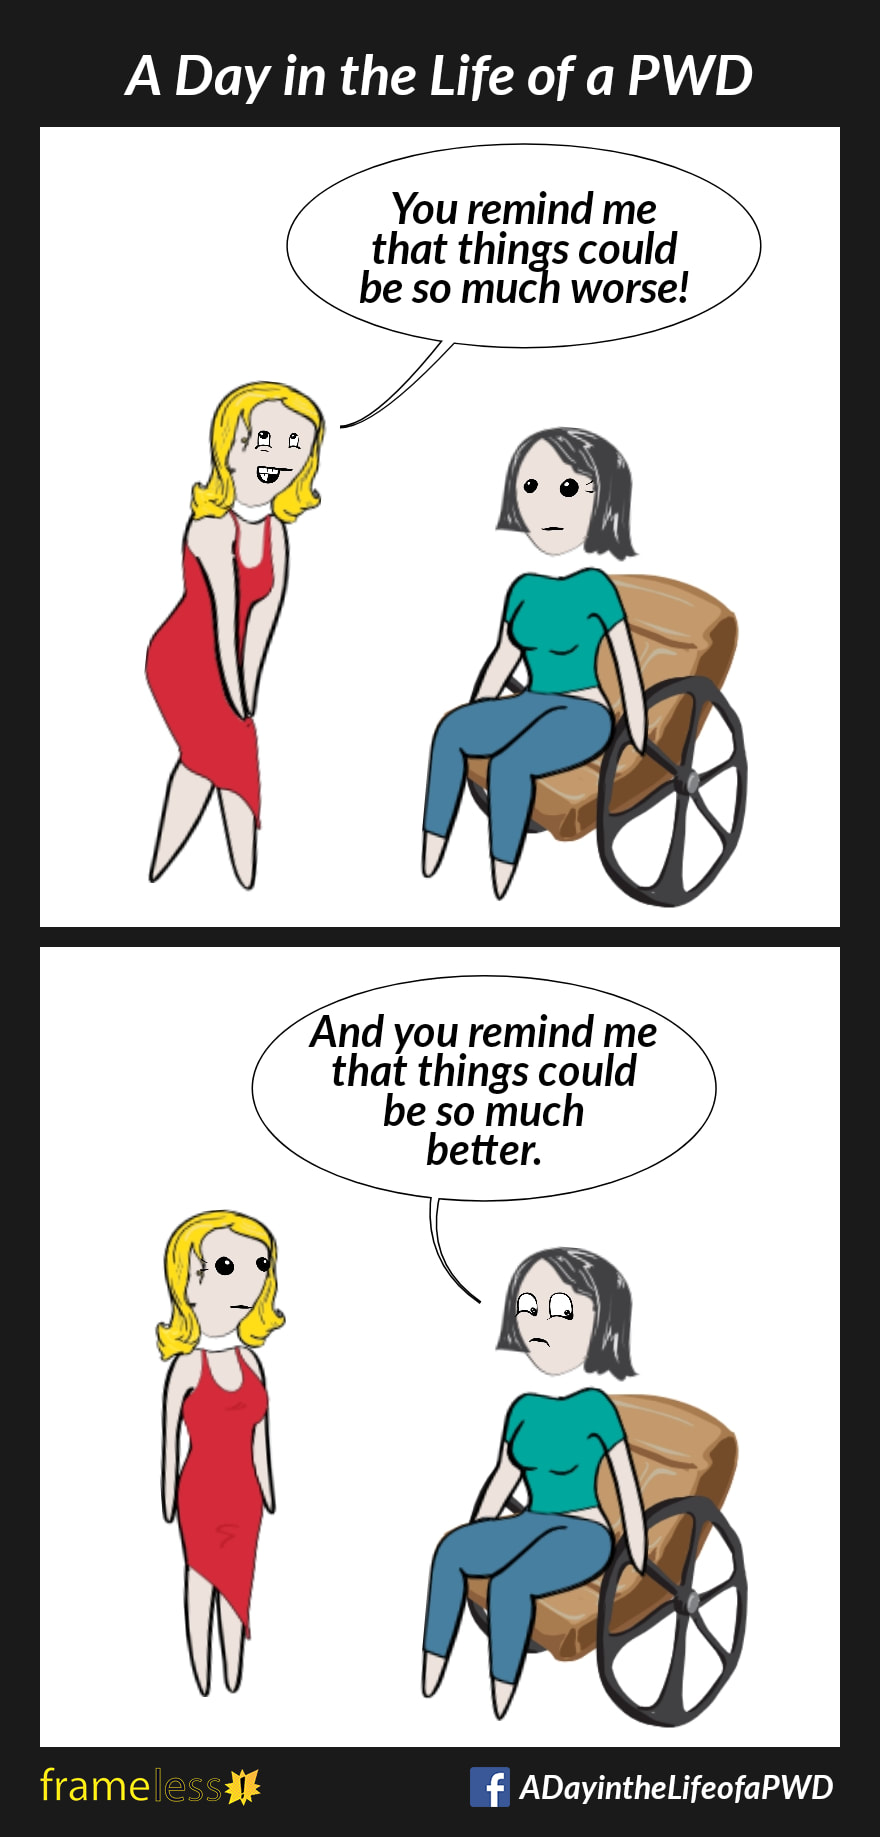 COMIC STRIP 
A Day in the Life of a PWD (Person With a Disability) 

Frame 1:
A woman in a wheelchair is approached by an acquaintance. 
ACQUAINTANCE: You remind me that things could be so much worse!

Frame 2:
WOMAN: And you remind me that things could be so much better.